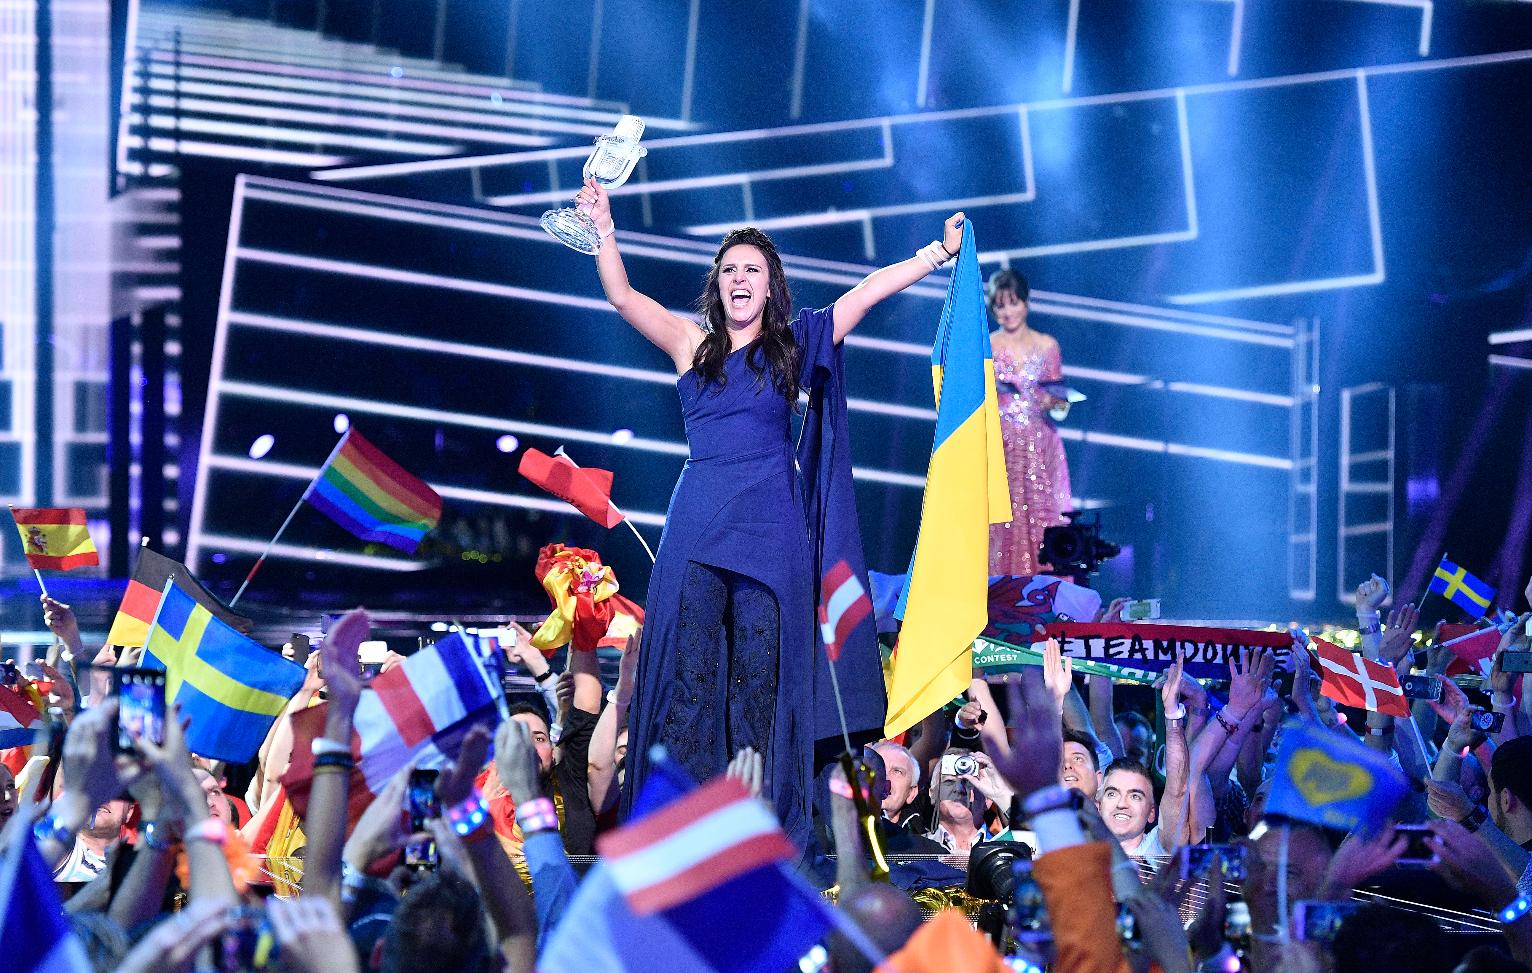 Russian coverage of Jamala’s victory descends to the level of old Soviet anecdote